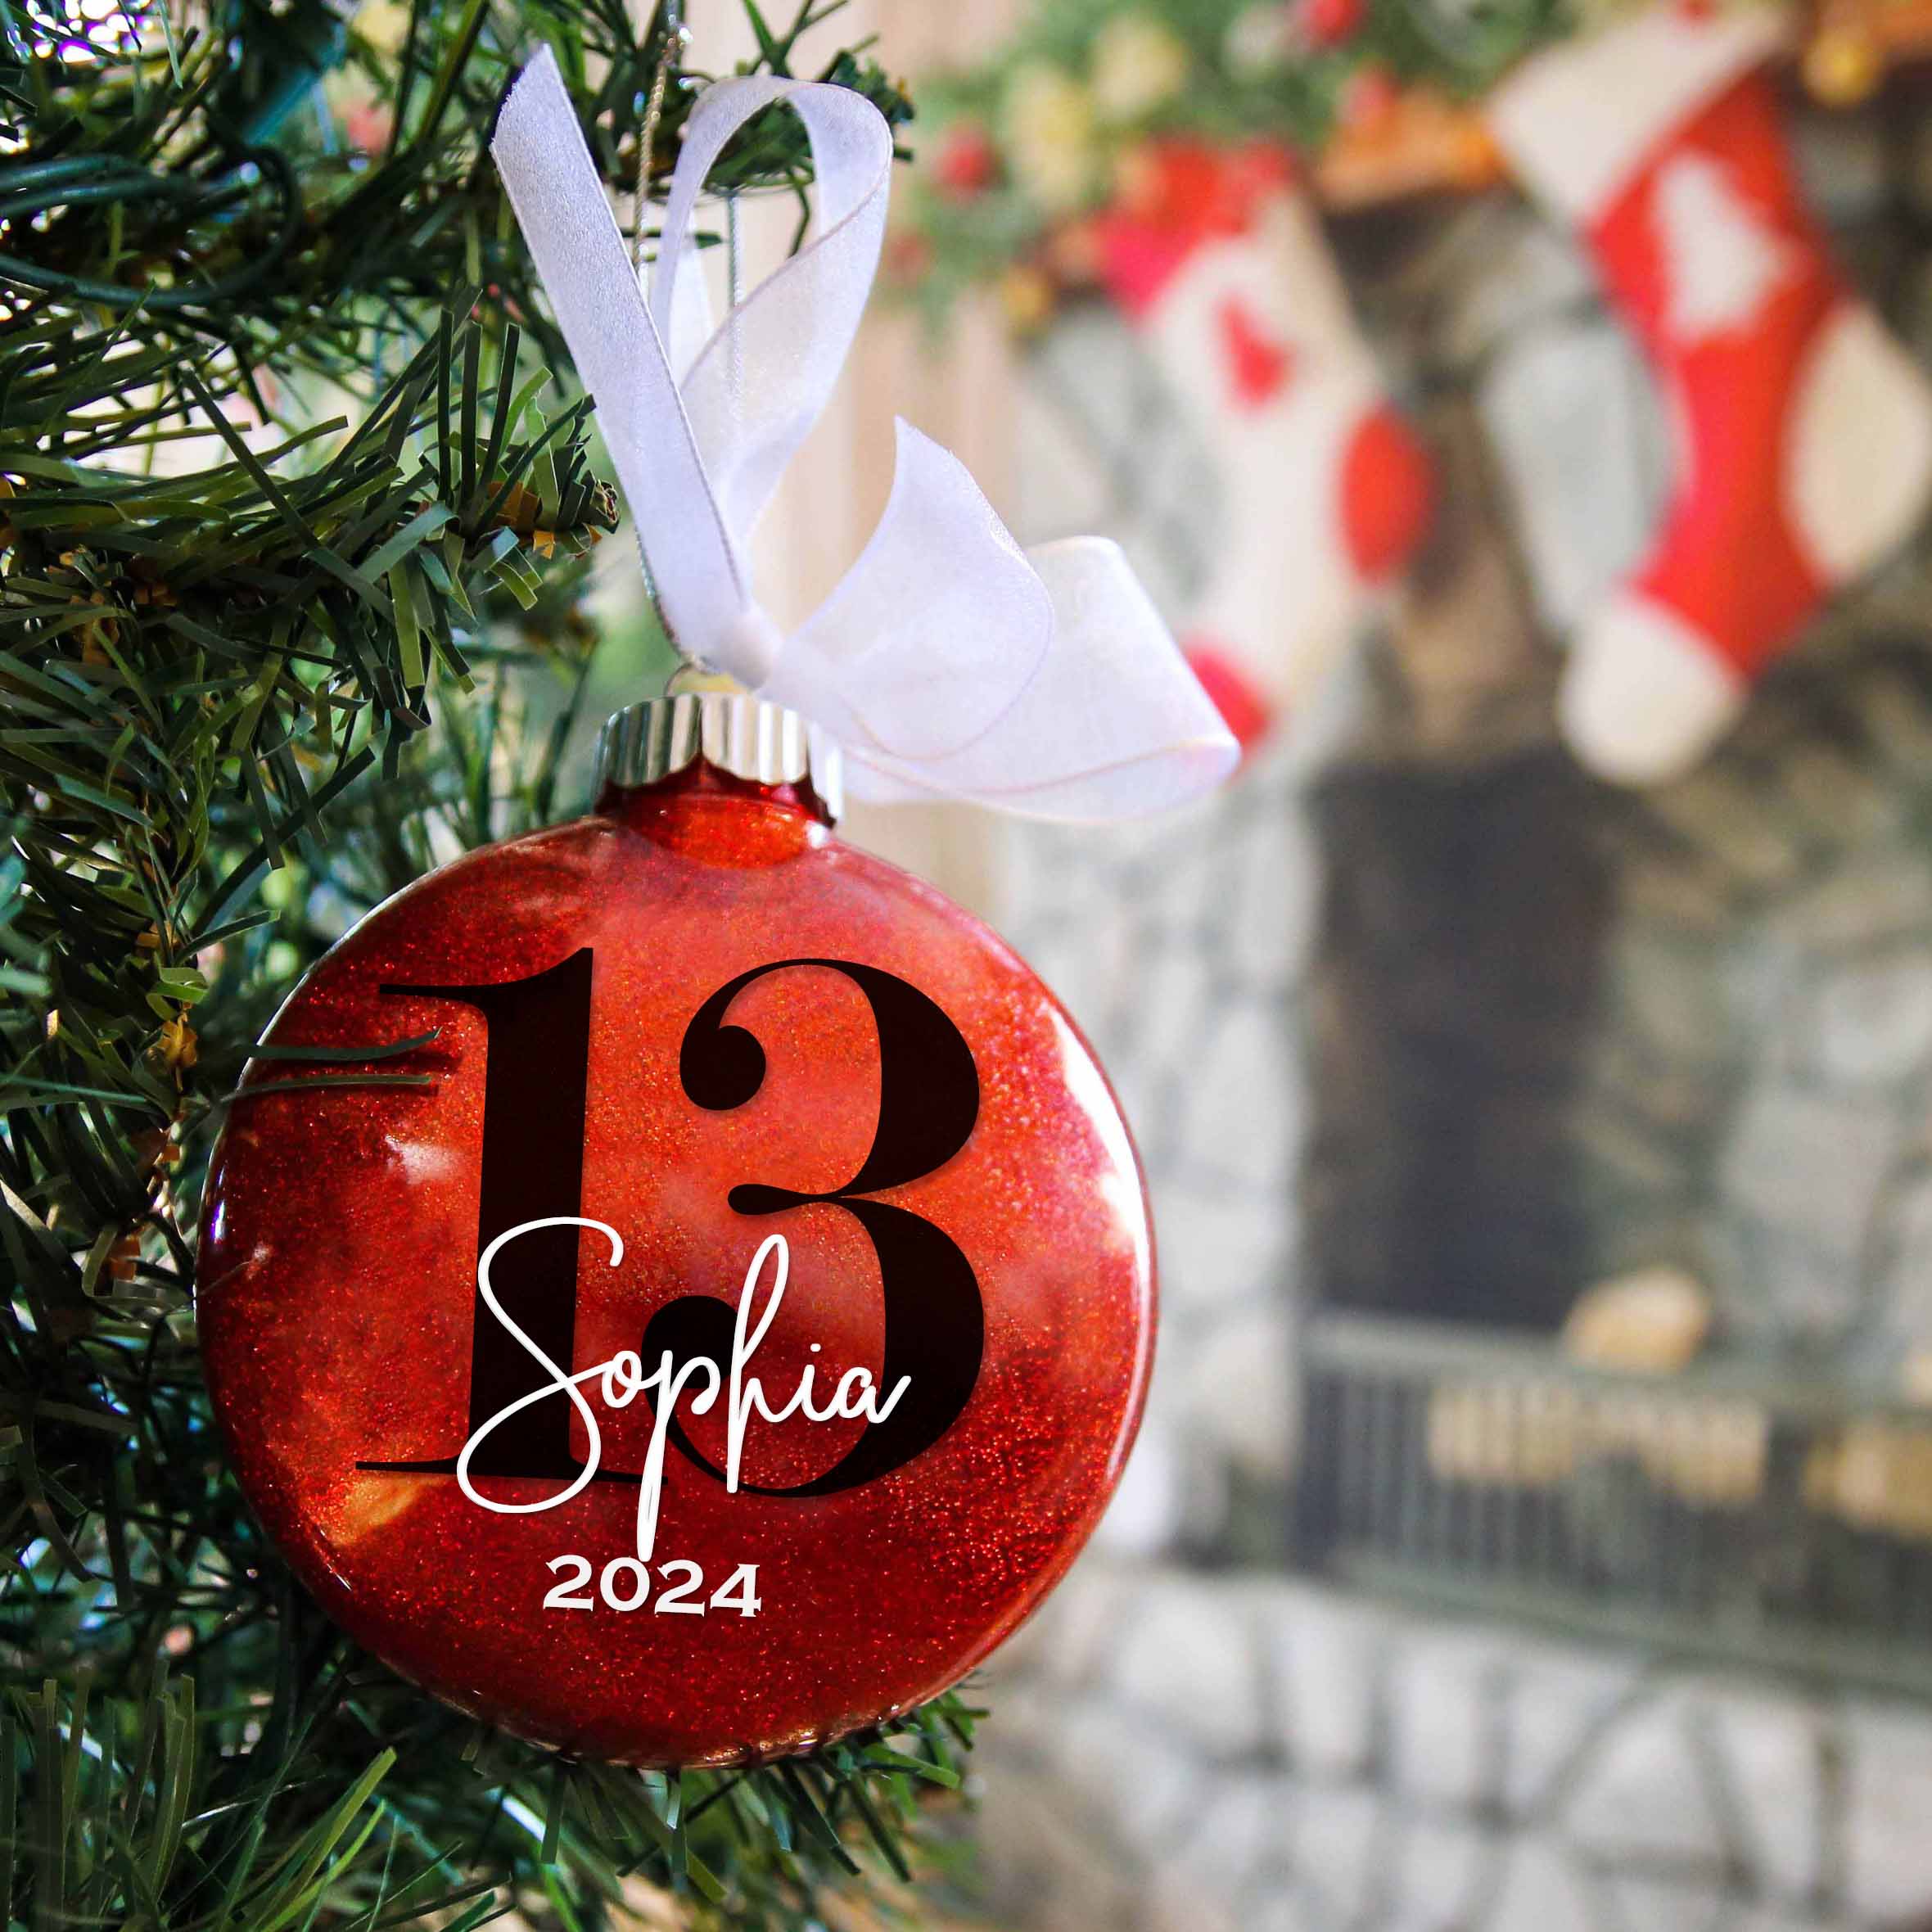 Red glittered ornament with the number 13 and Sophia 2024 hanging in a Christmas tree